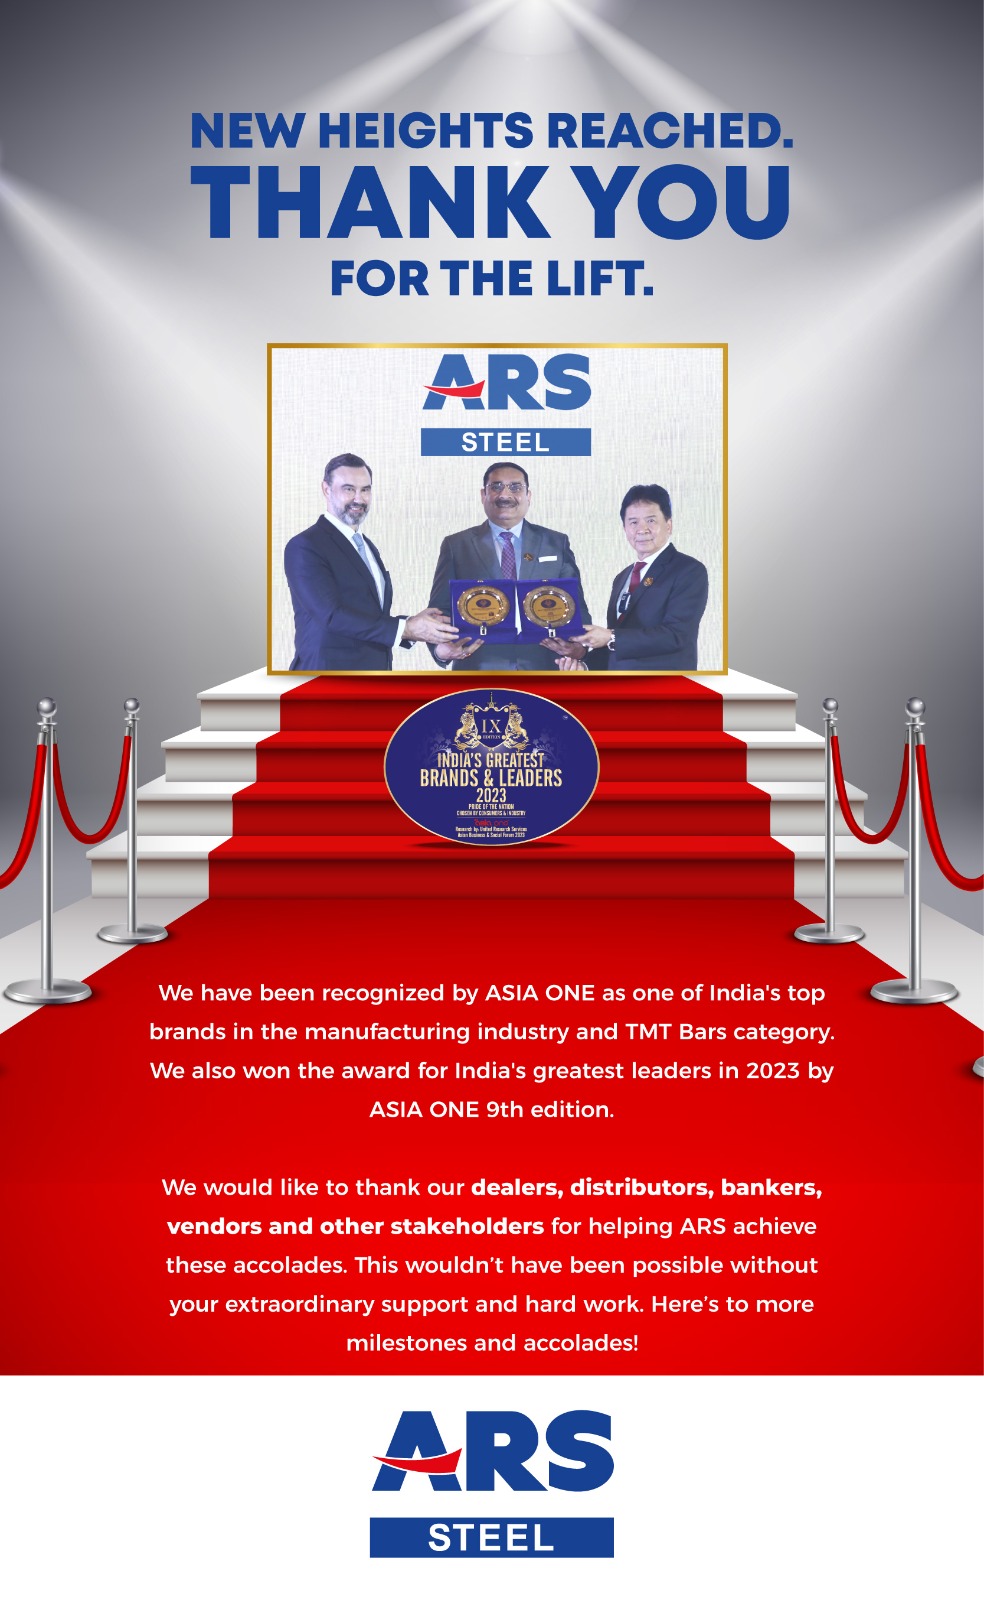 asia one 9th edition awards